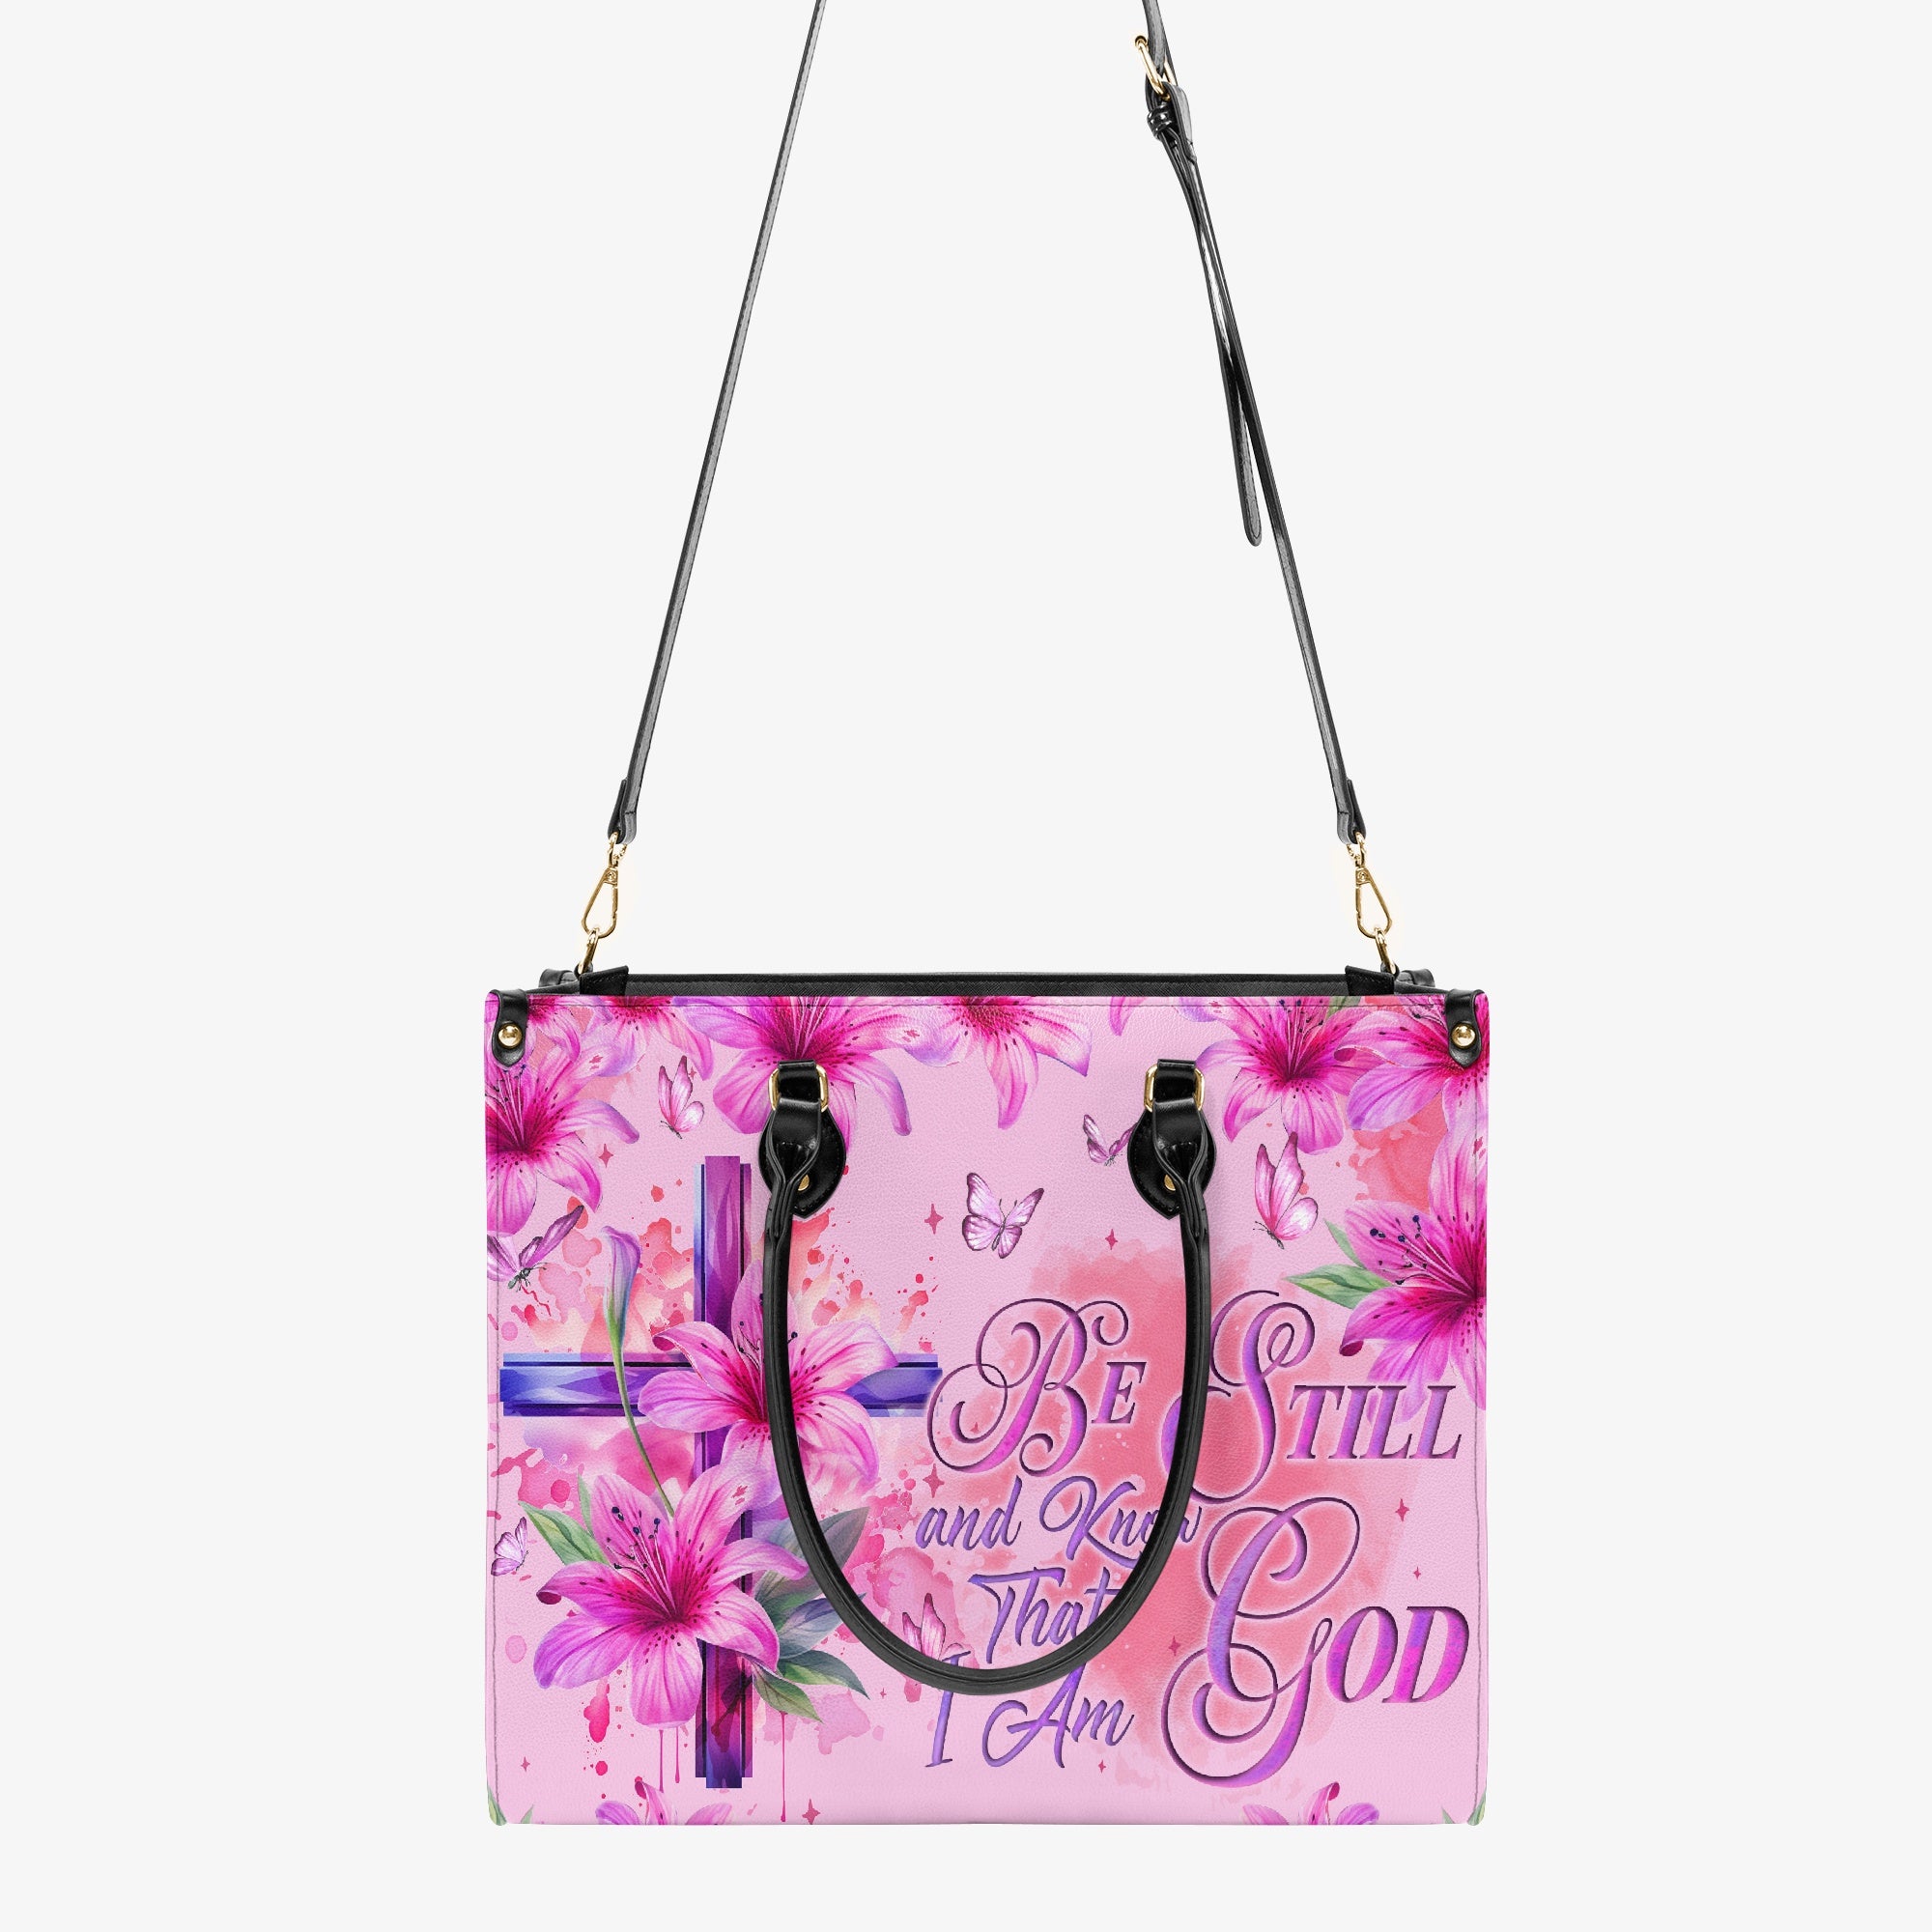 Be Still And Know That I Am God Leather Handbag - Tyqy0204244